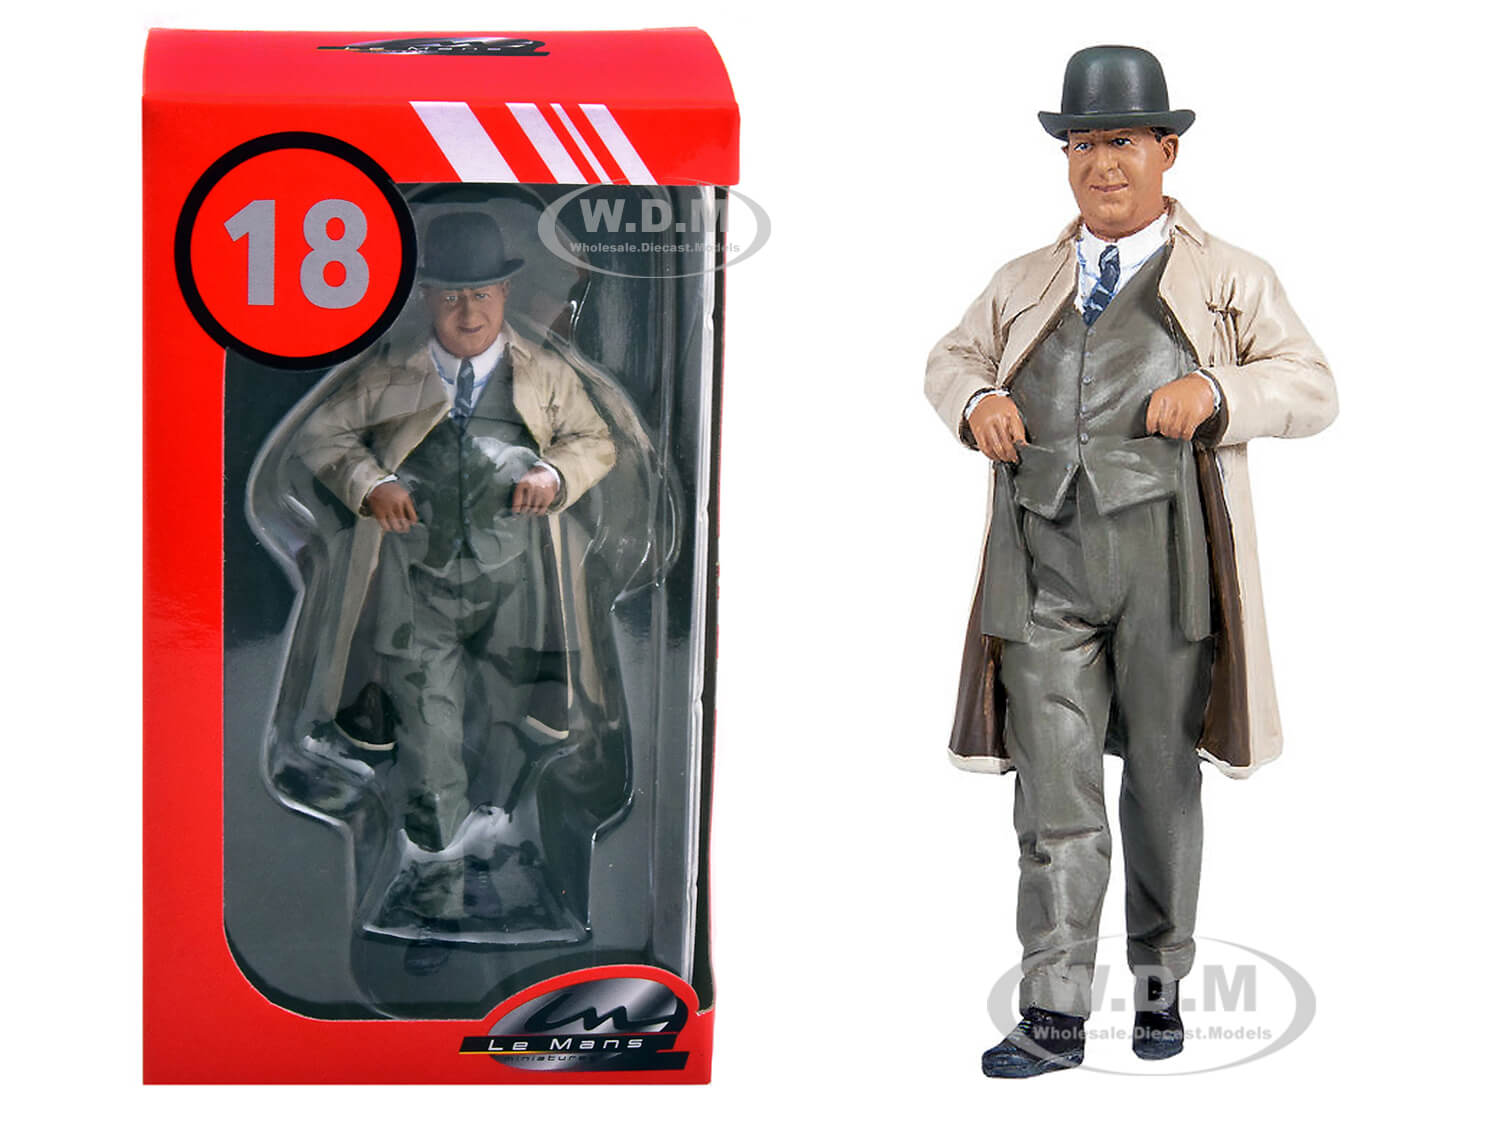 1930s Ettore Bugatti with Raincoat Figurine for 1/18 Scale Model Cars by Le Mans Miniatures